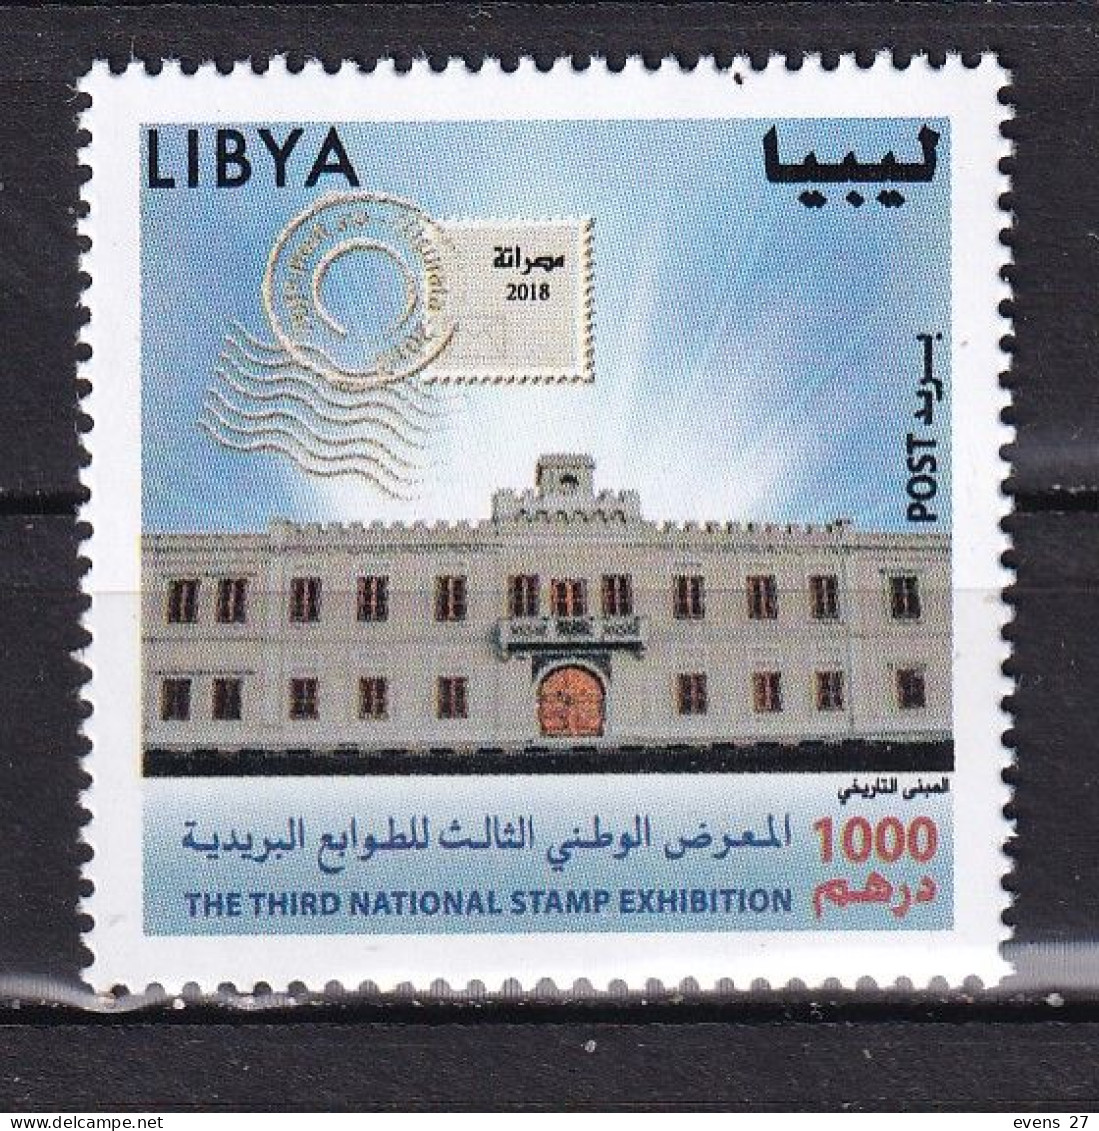 LIBYA-2018-3rd,- NATIONAL STAMP EXHIBITION-MNH. - Unused Stamps